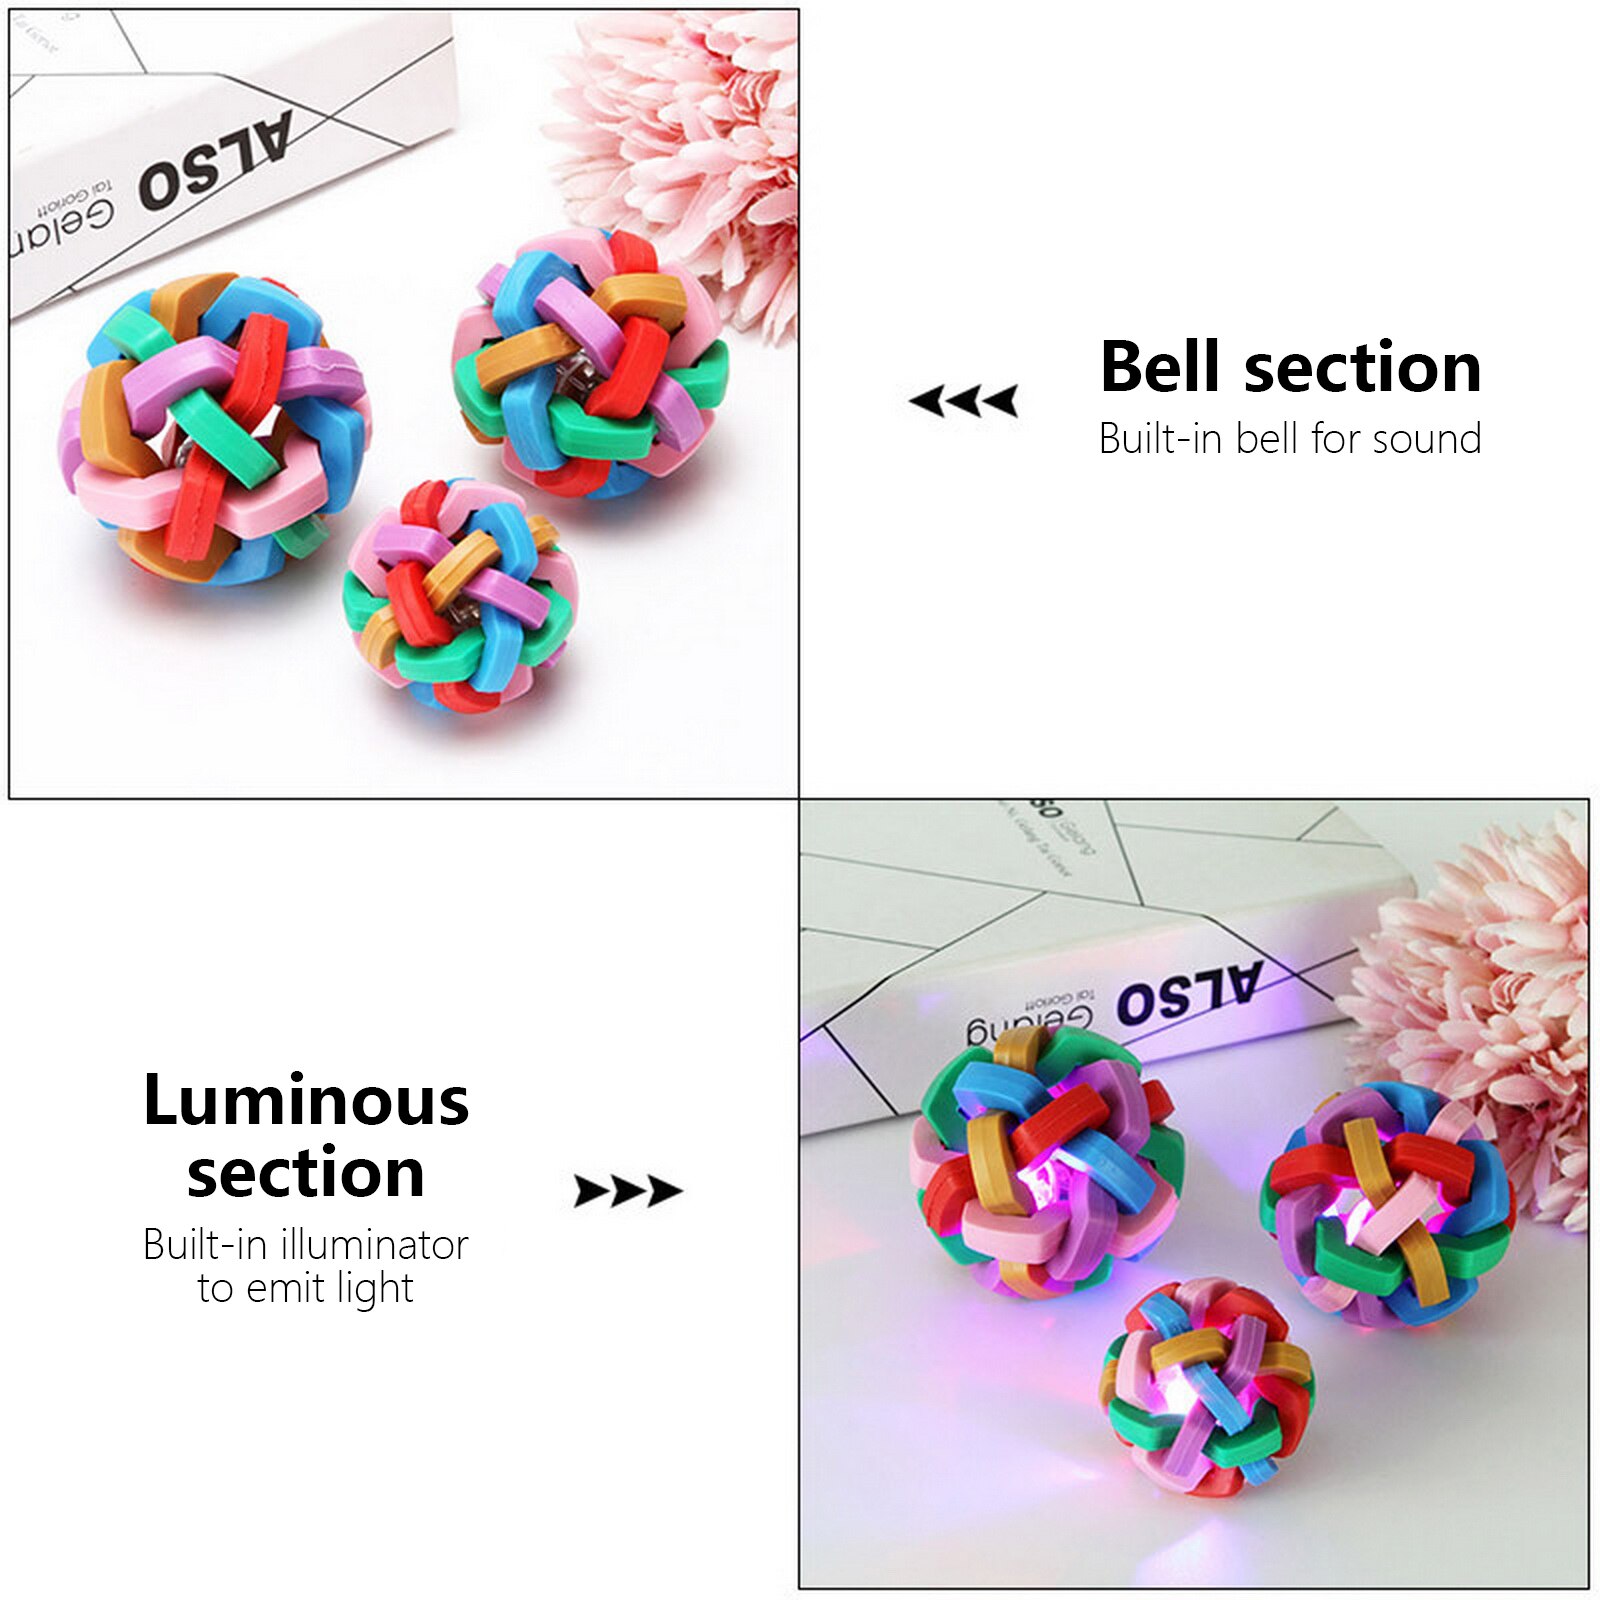 5.5cm Colorful Rainbow Pet LED toys Pet Bell Ball Dog Toy Cat Toys Pet Dog Ball Bell Chew Toys Play Teeth Training Pet Products